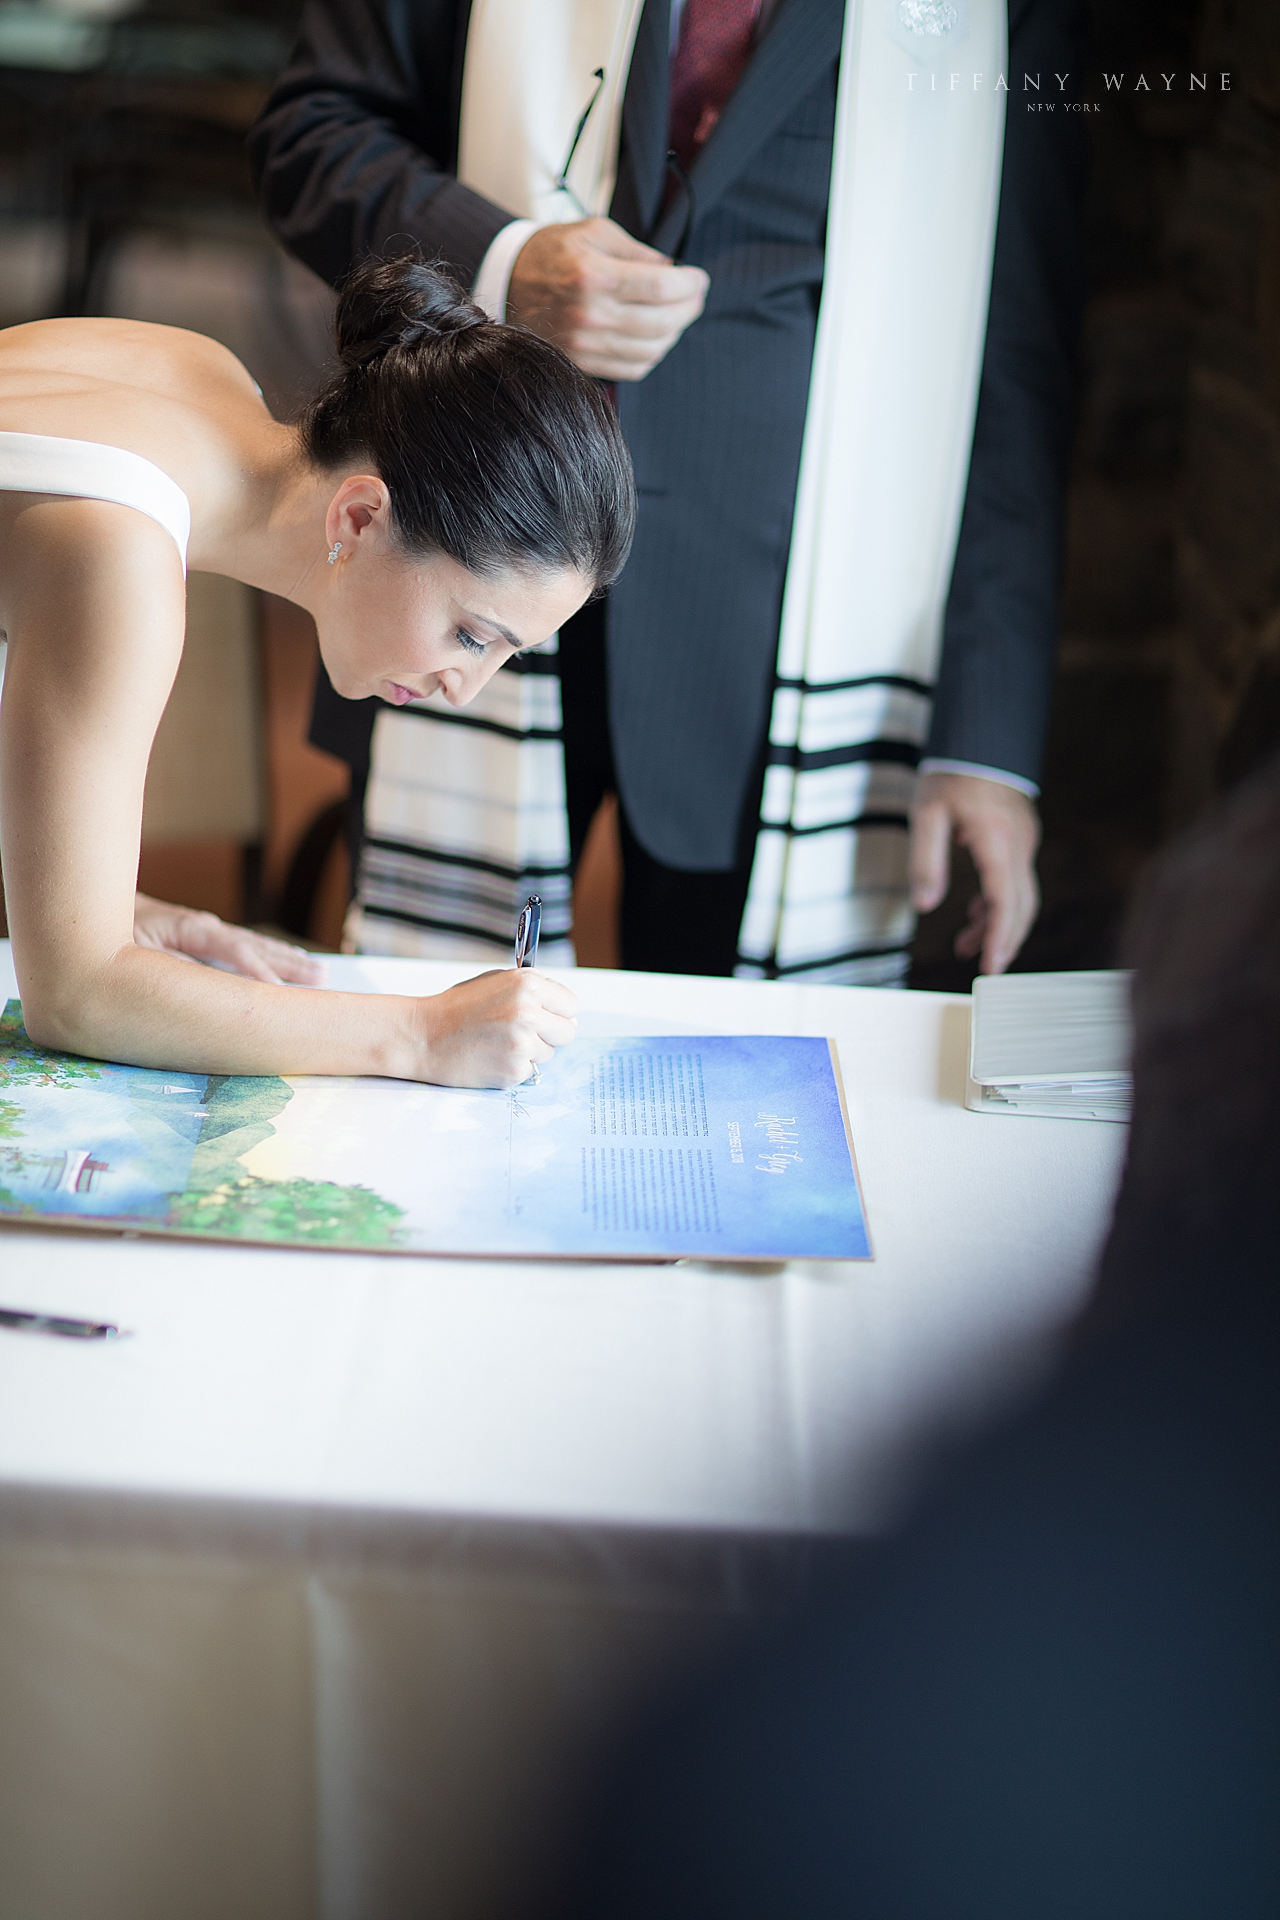 bride signs wedding license during ceremony photographed by wedding photographer Tiffany Wayne